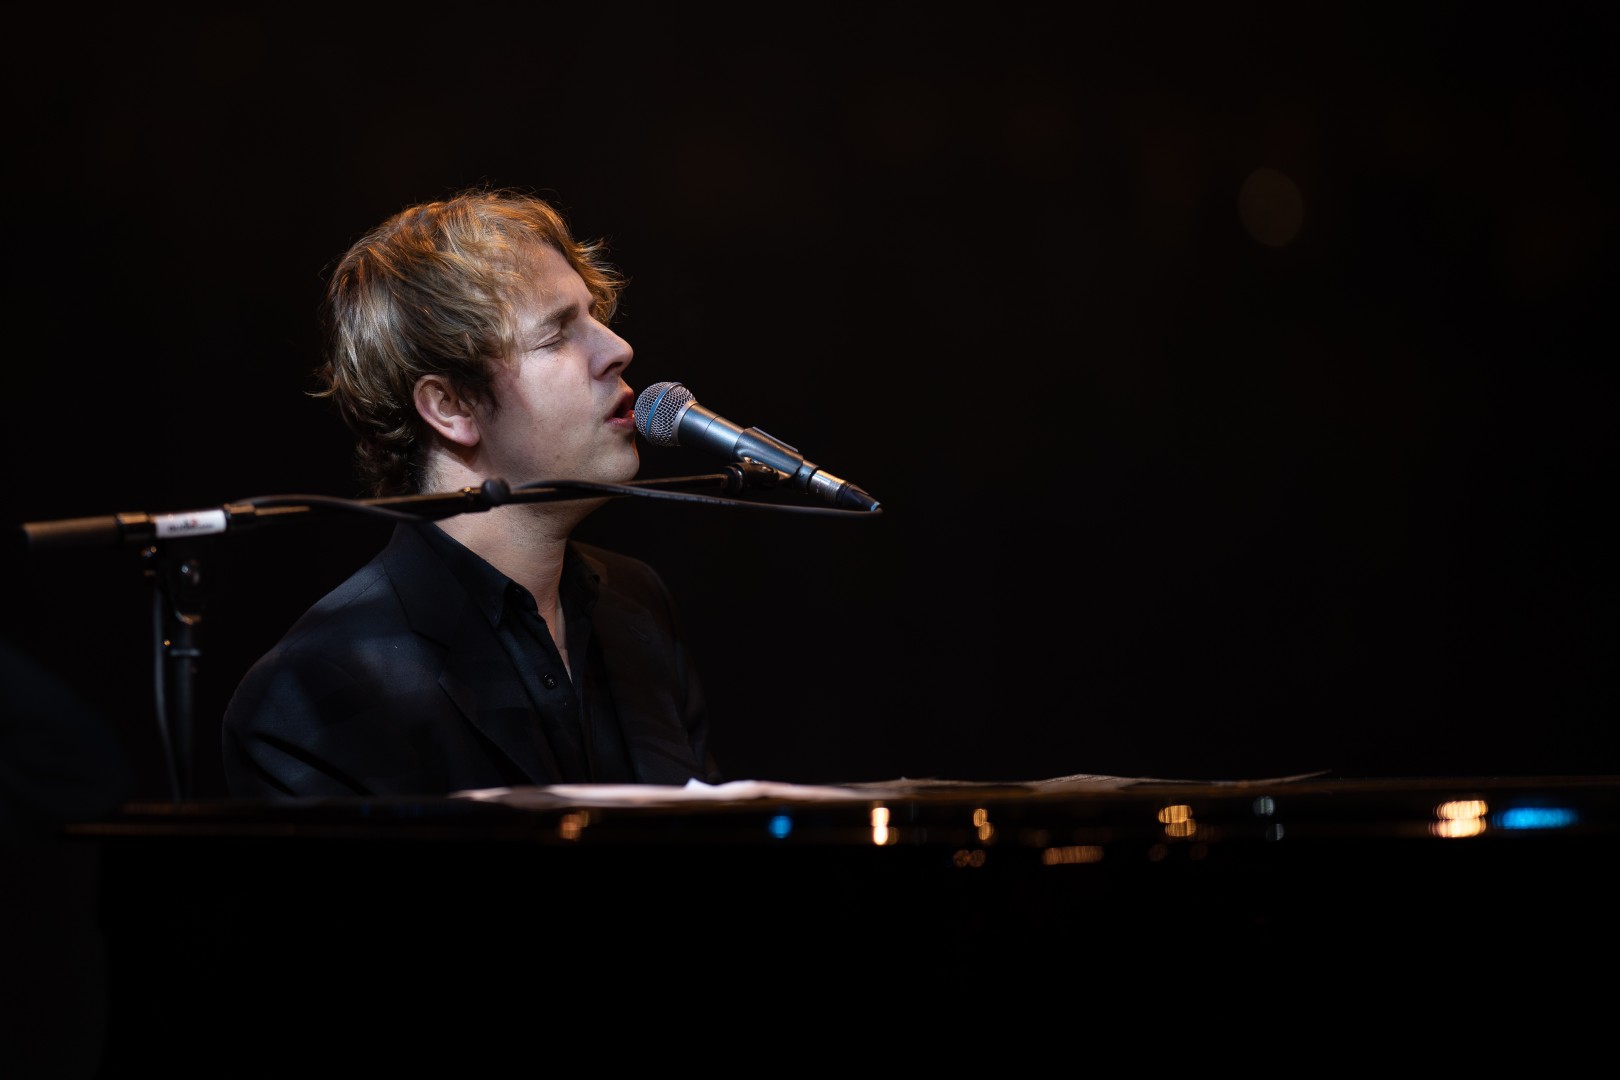 Tom Odell at National Arena in Bucharest on March 12, 2022 (c0e65f9cb0)